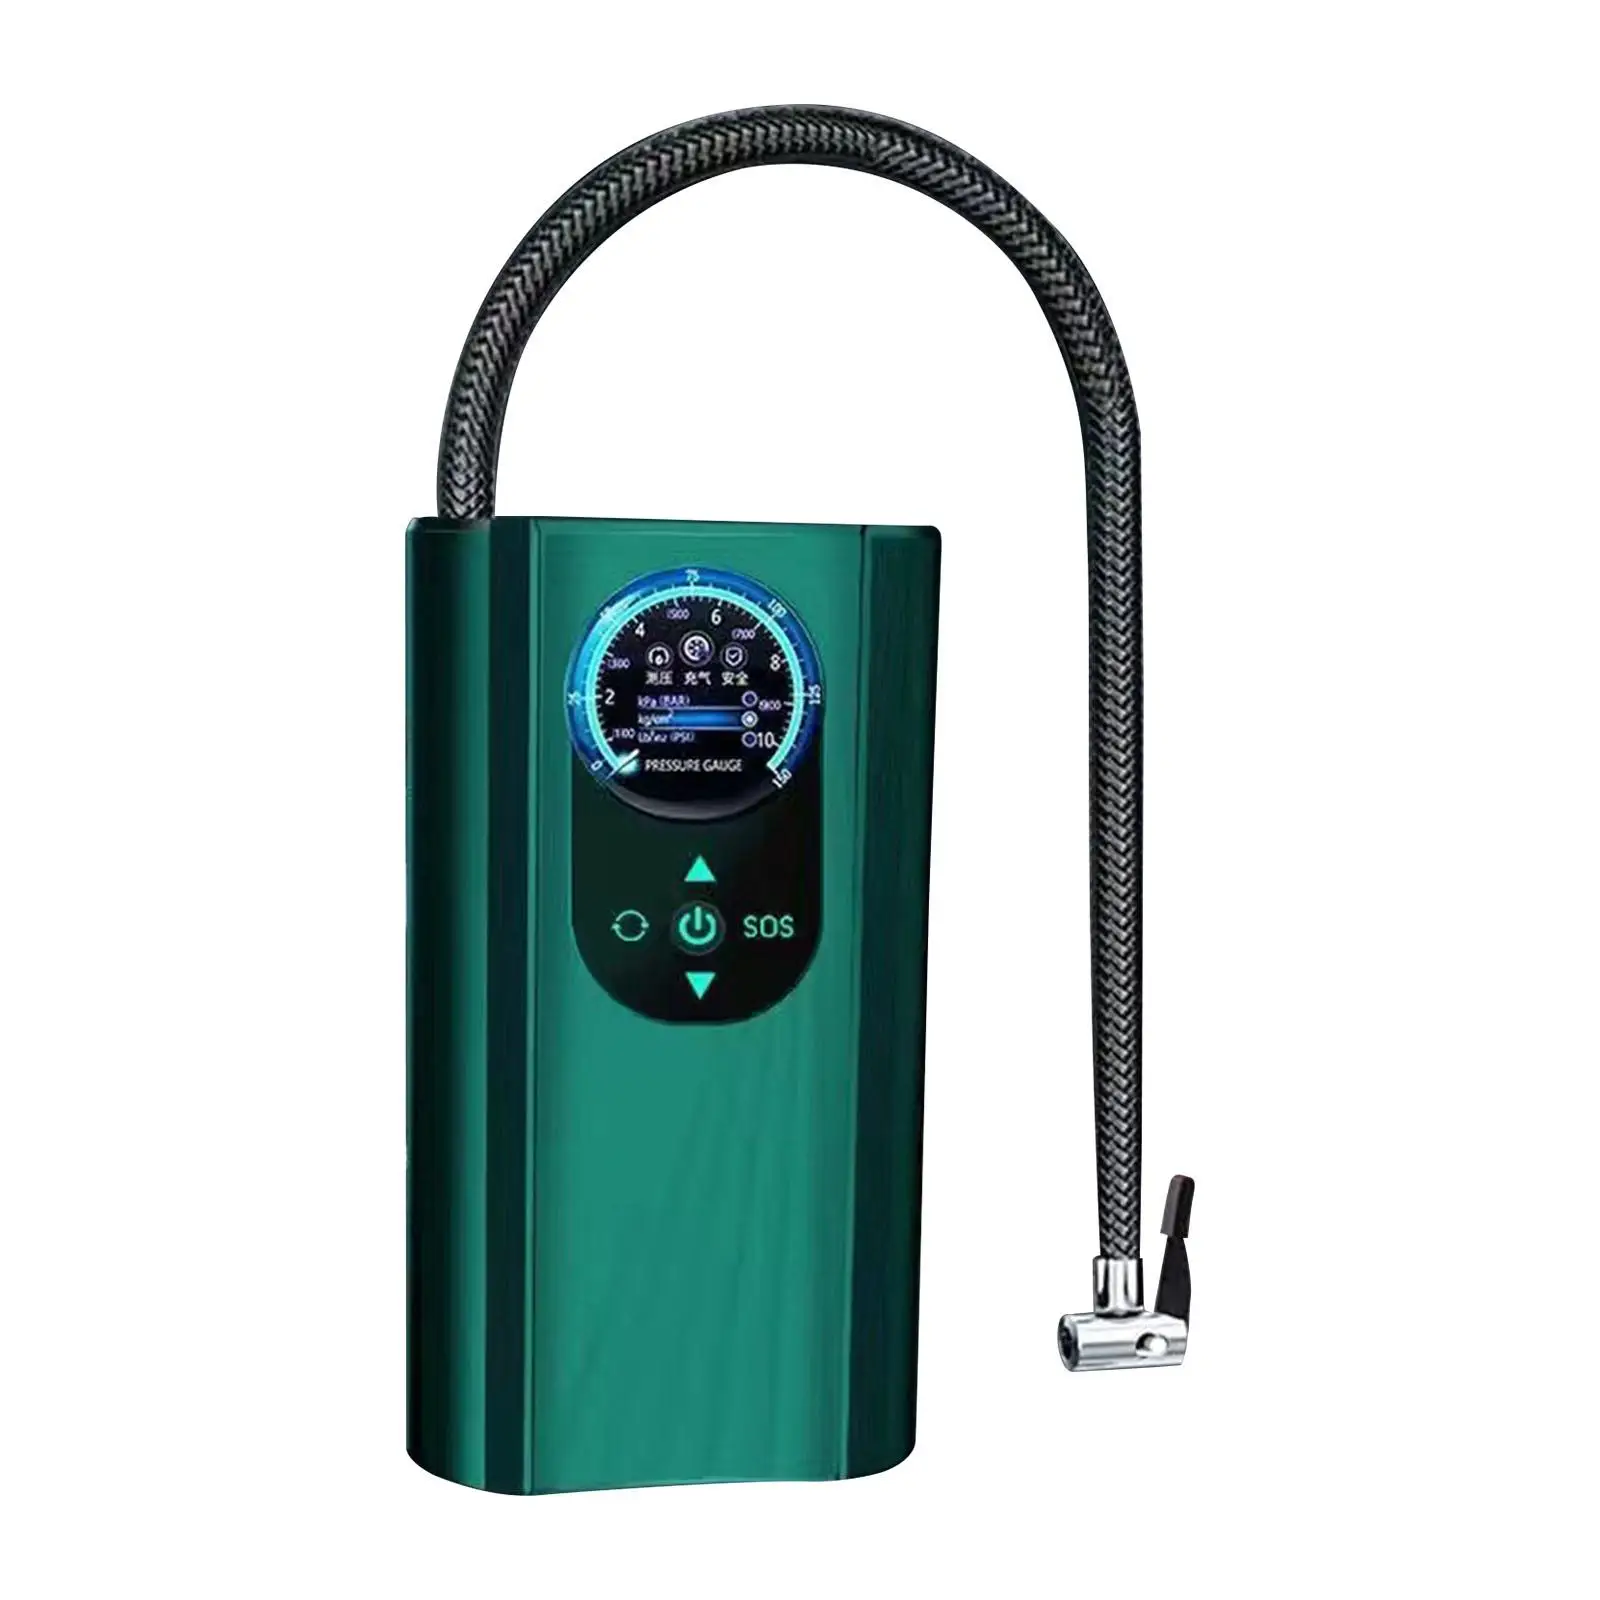 Portable Air Compressor with Pressure Gauge Fast LCD Display Screen Electric Tire Pump for Bicycle Basketball SUV Ball Bike